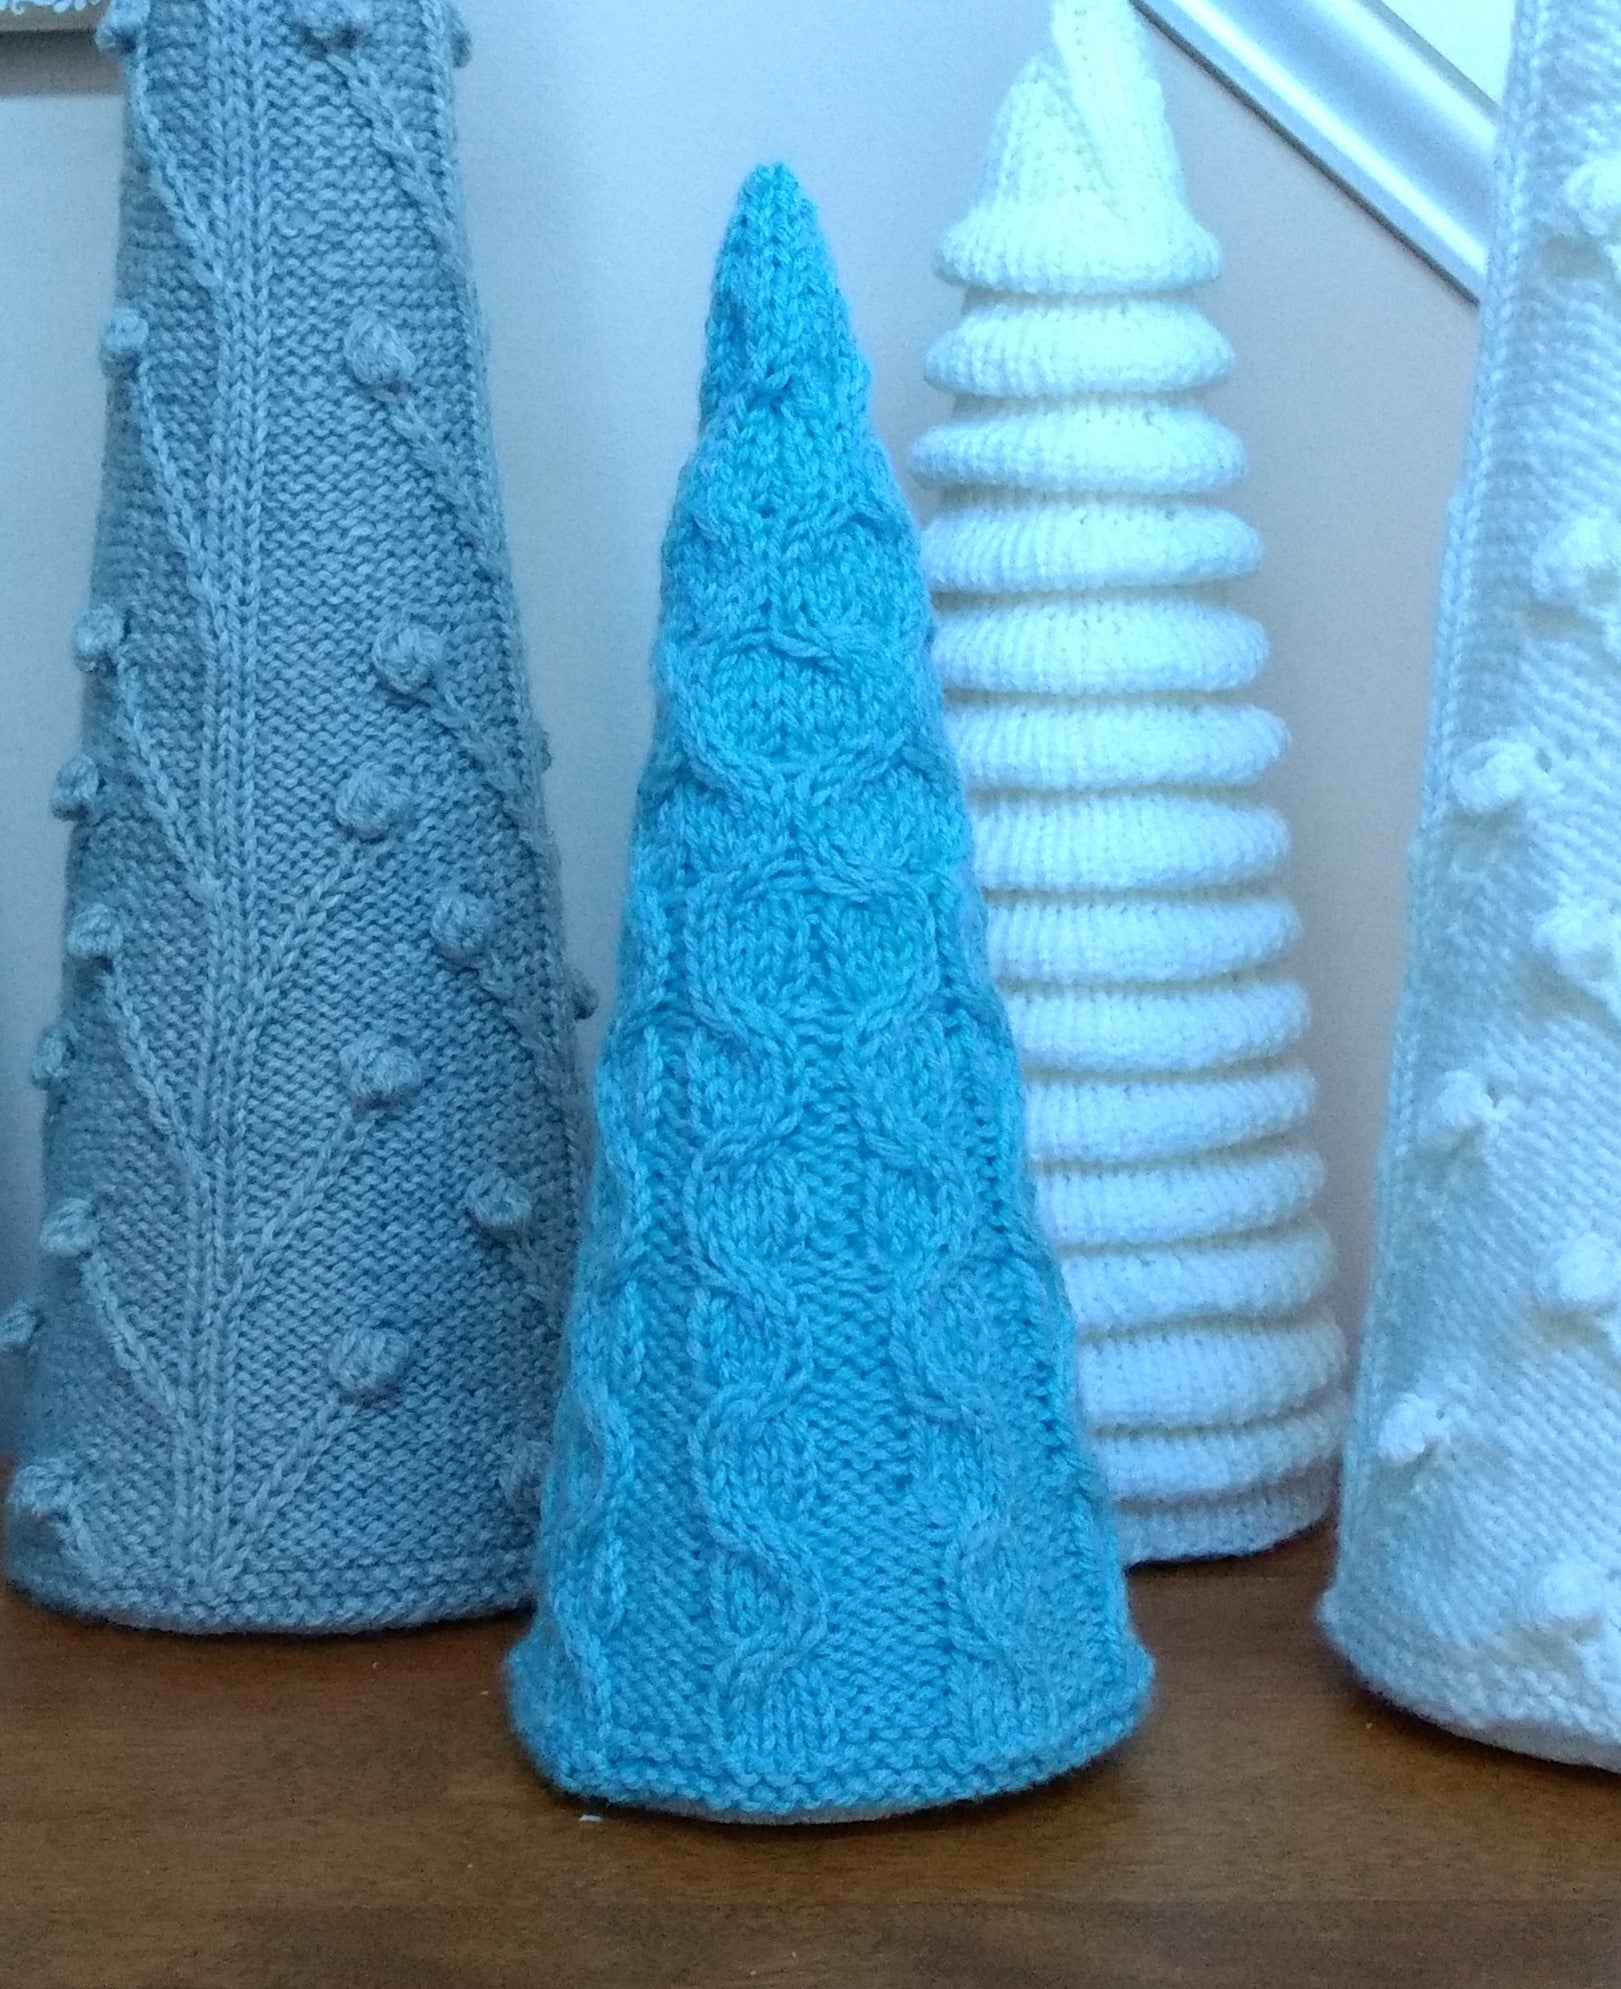 Knitted Christmas Trees, knitting pattern, holiday decor